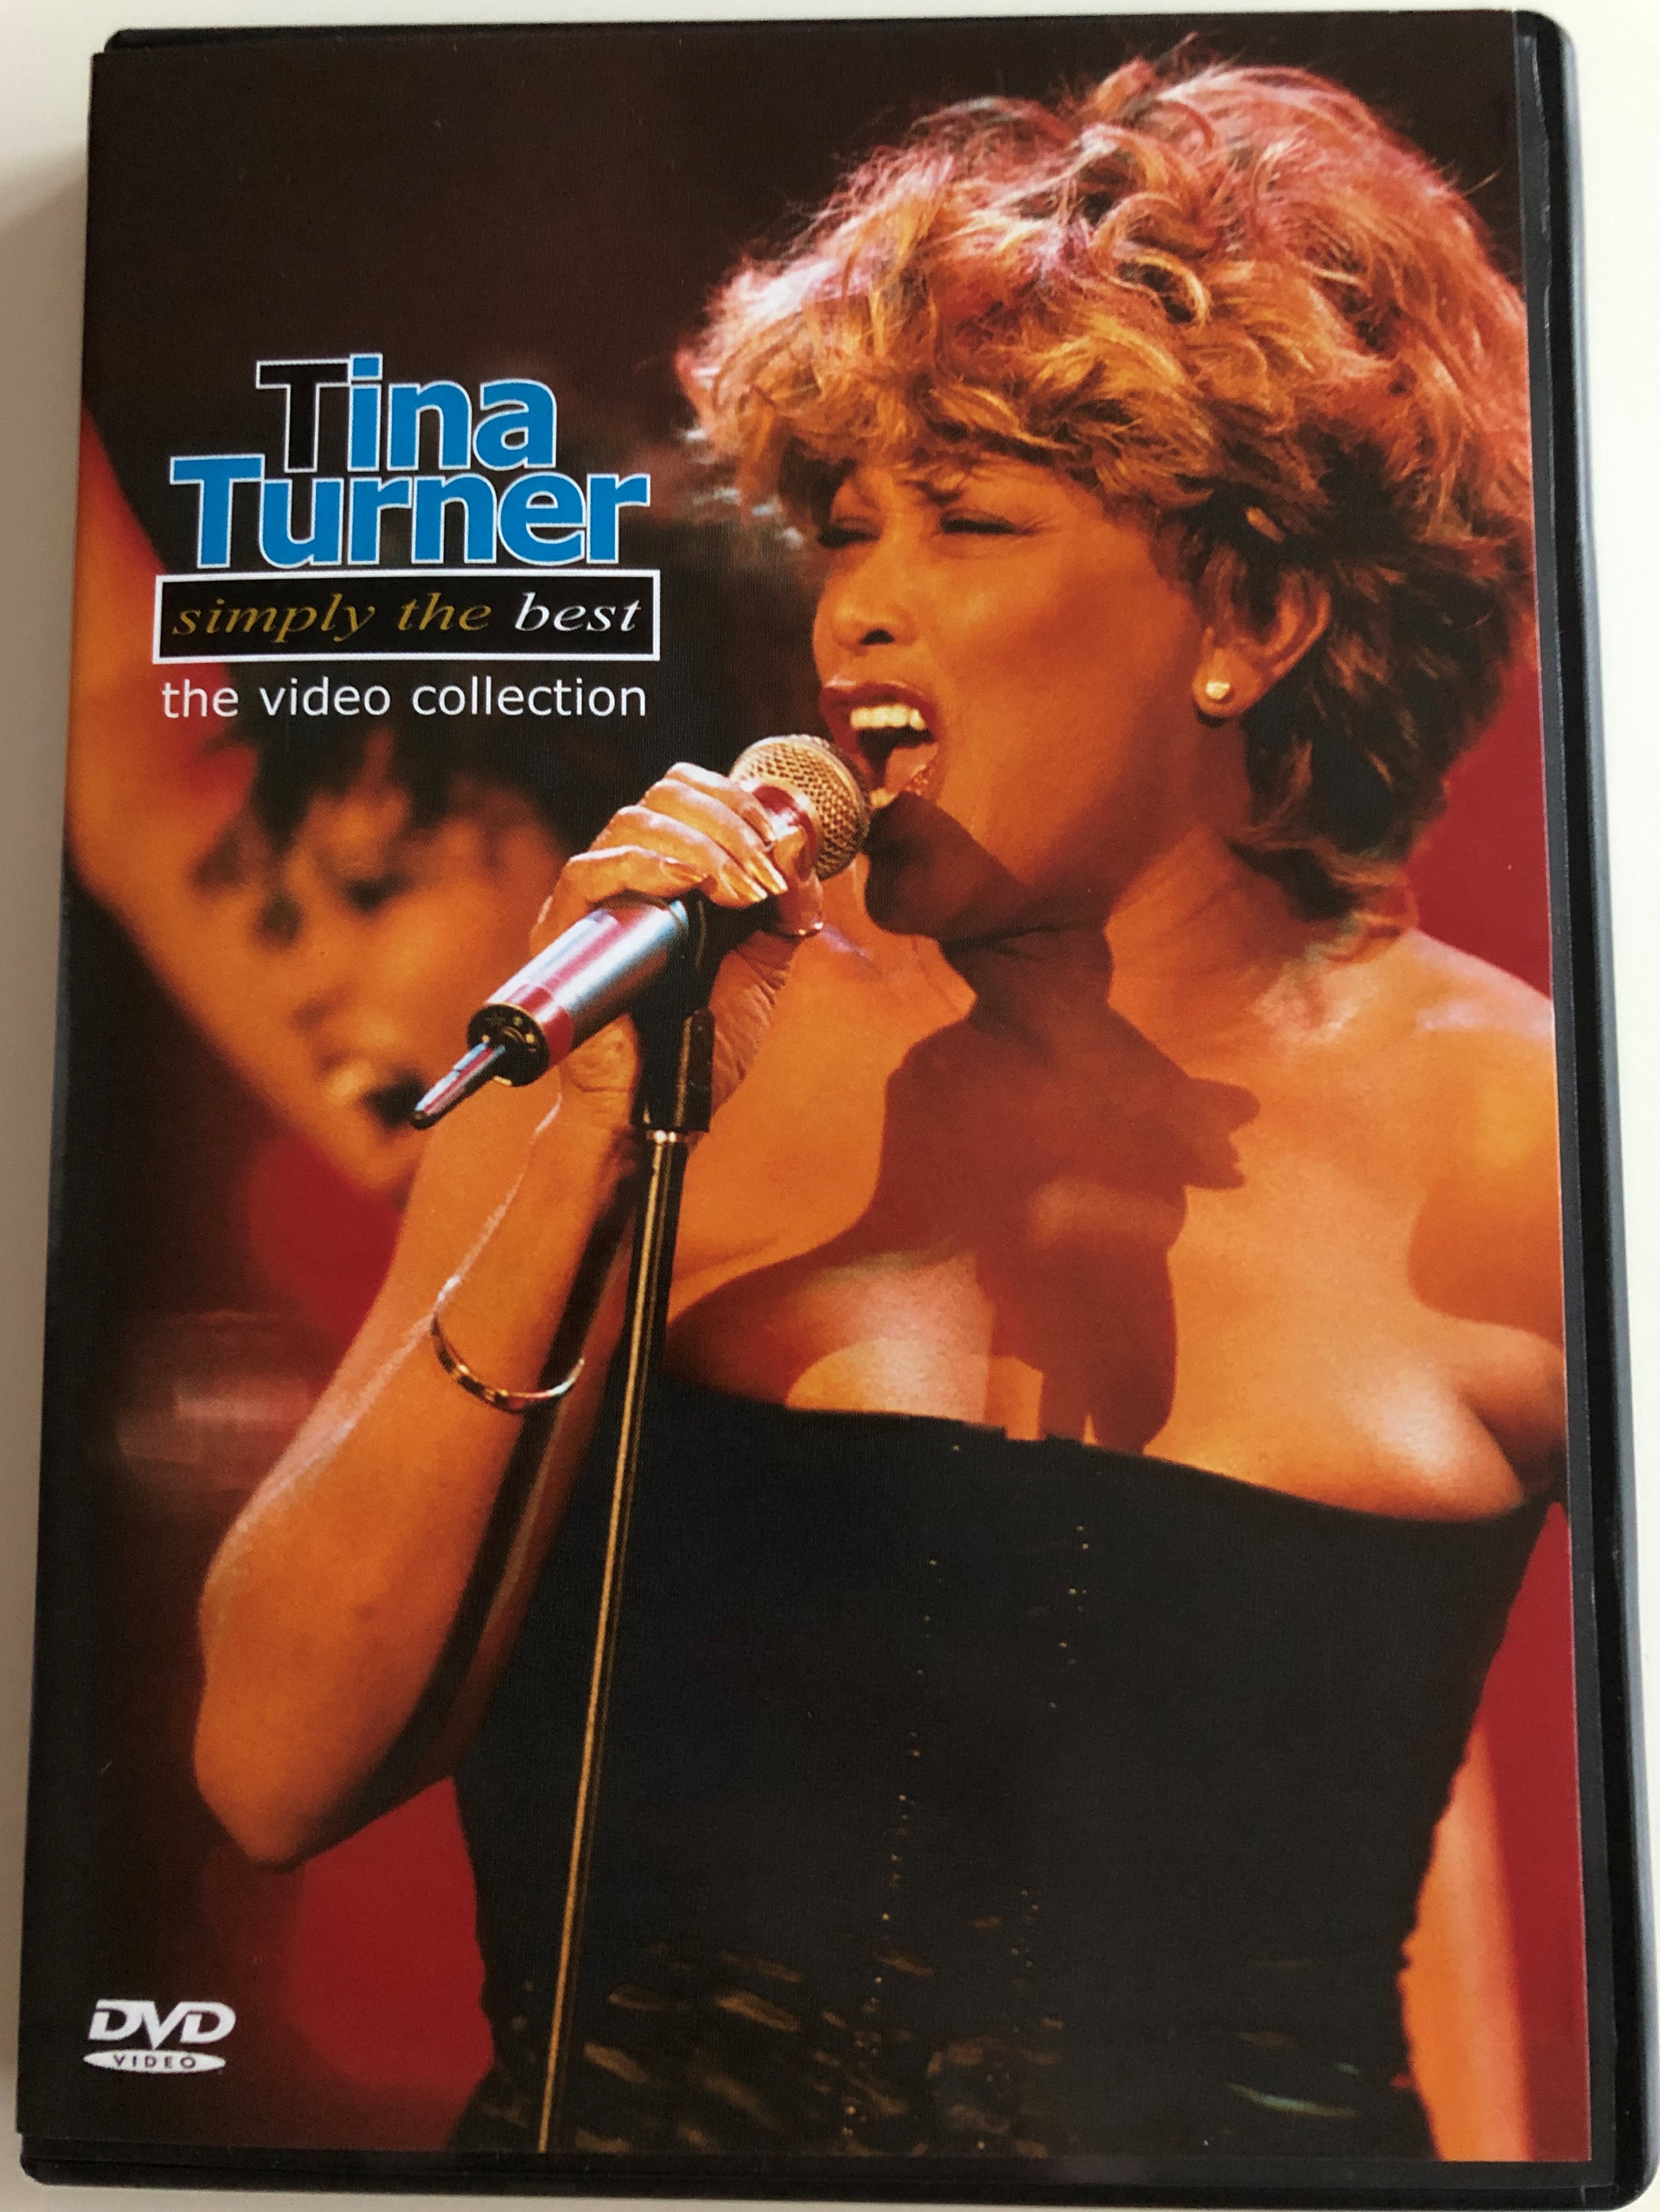 tina-turner-dvd-2004-simply-the-best-the-video-collection-1.jpg